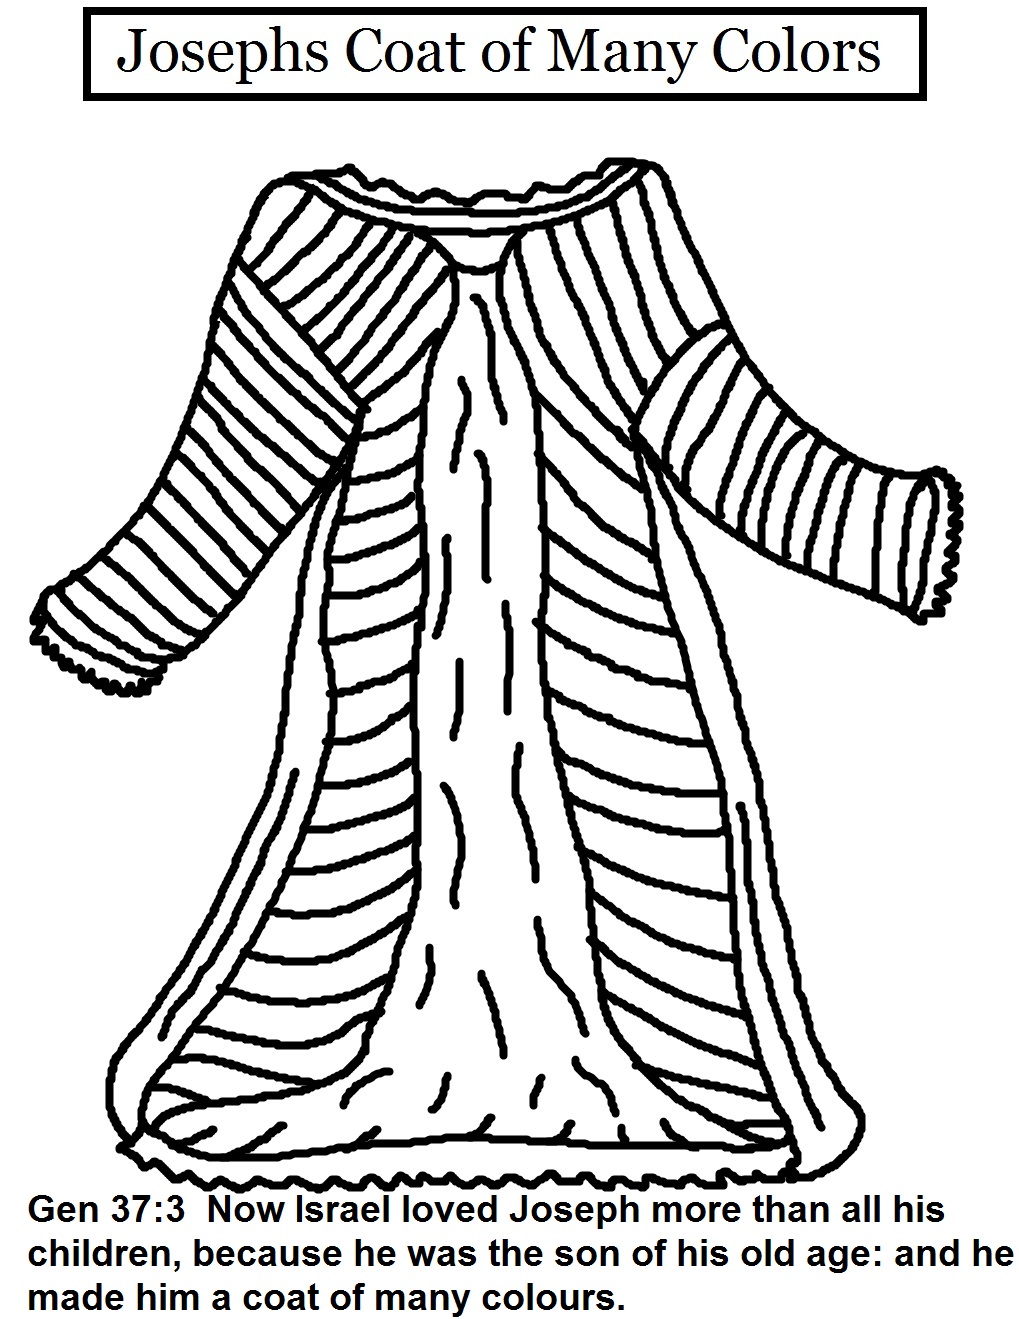 Josephs Coat of many colors coloring pages